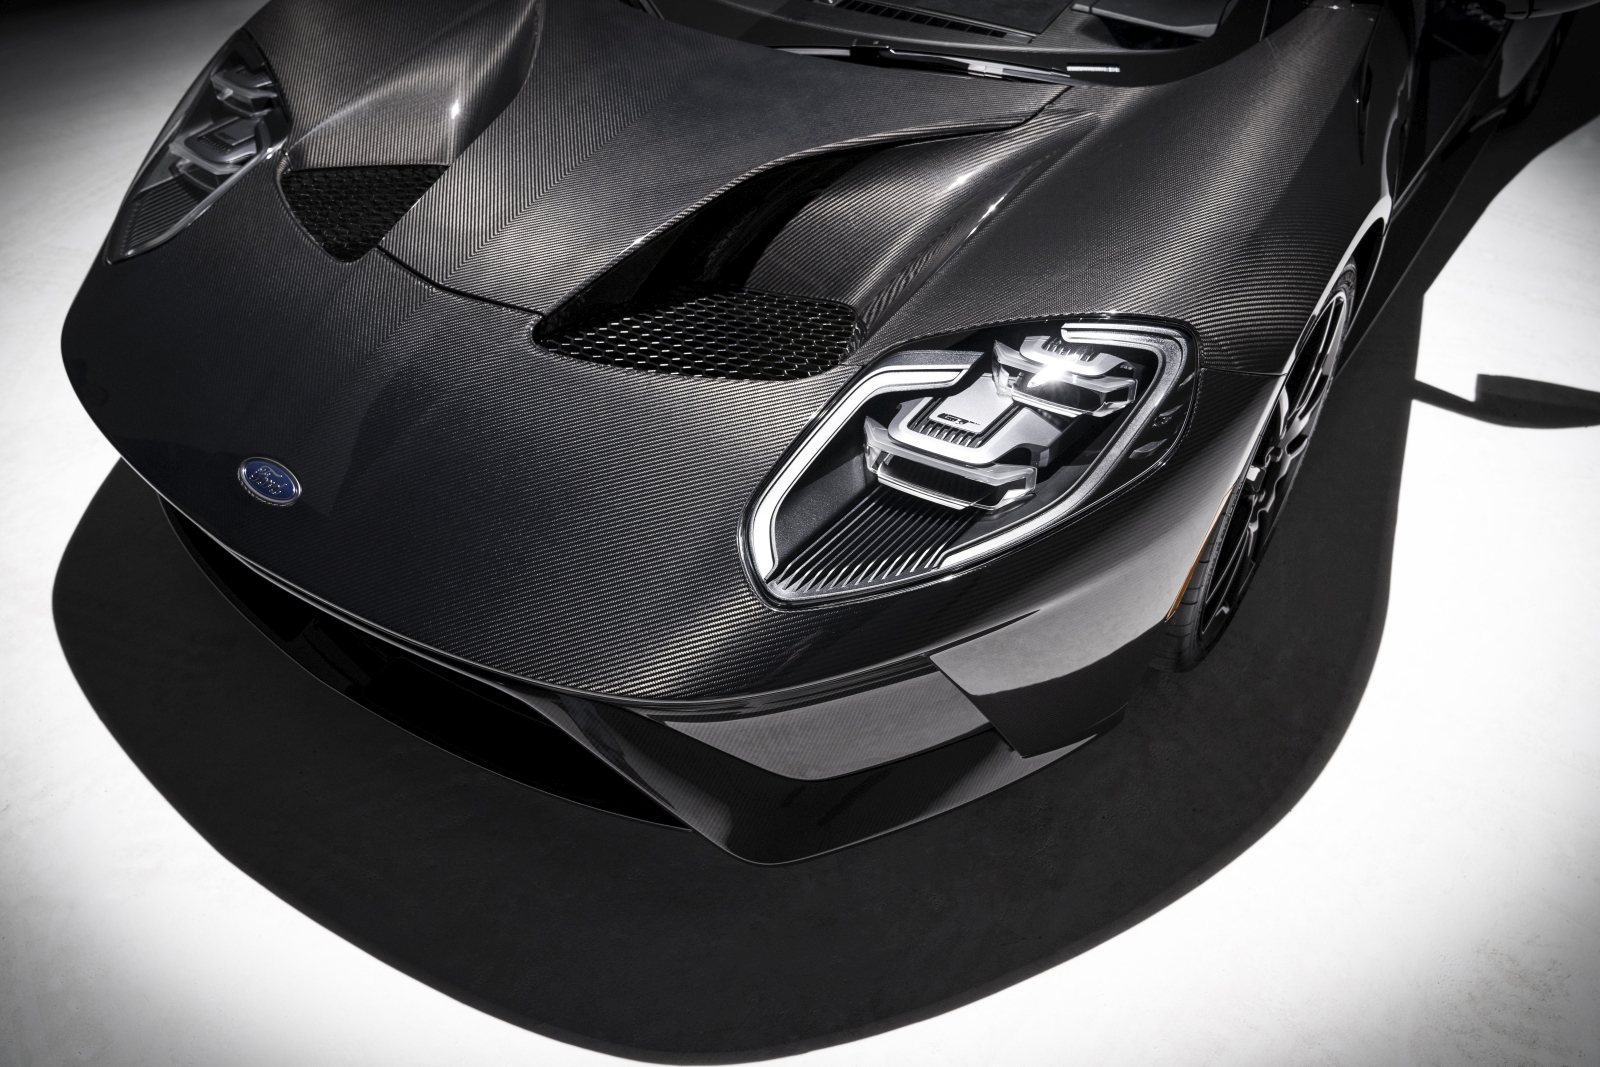 Carbon fiber: what is it, how is it made and why does everyone